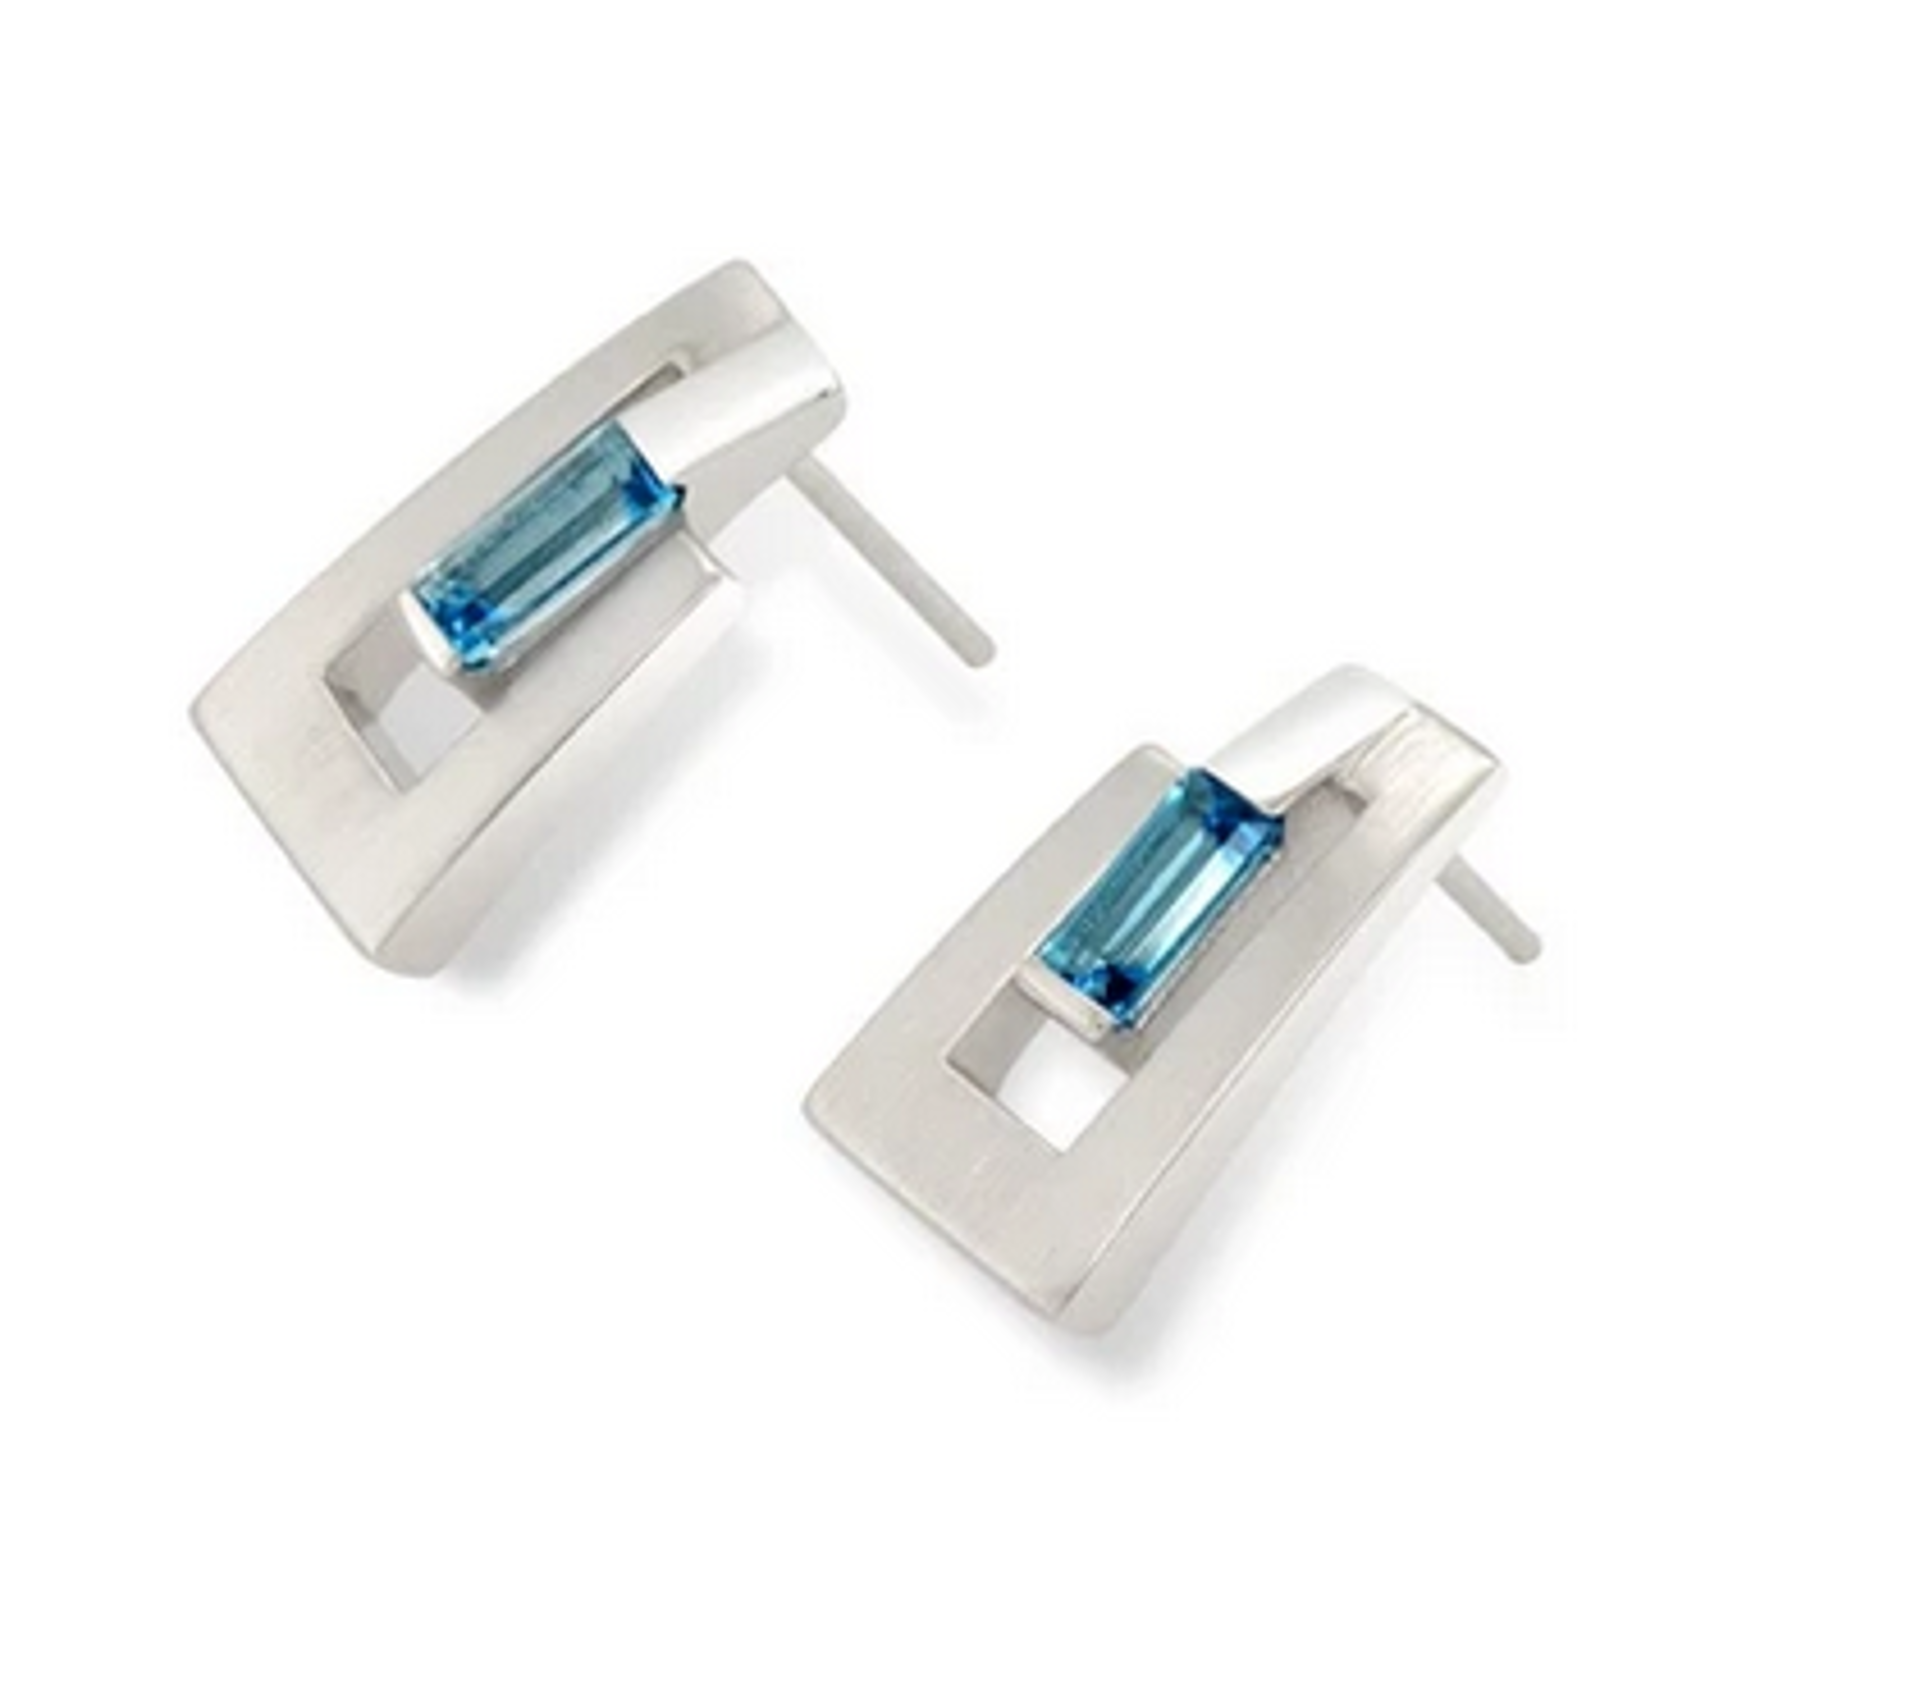 Earrings - Emerald Cut London Blue Topaz With Brushed Silver E9360LBT by Joryel Vera